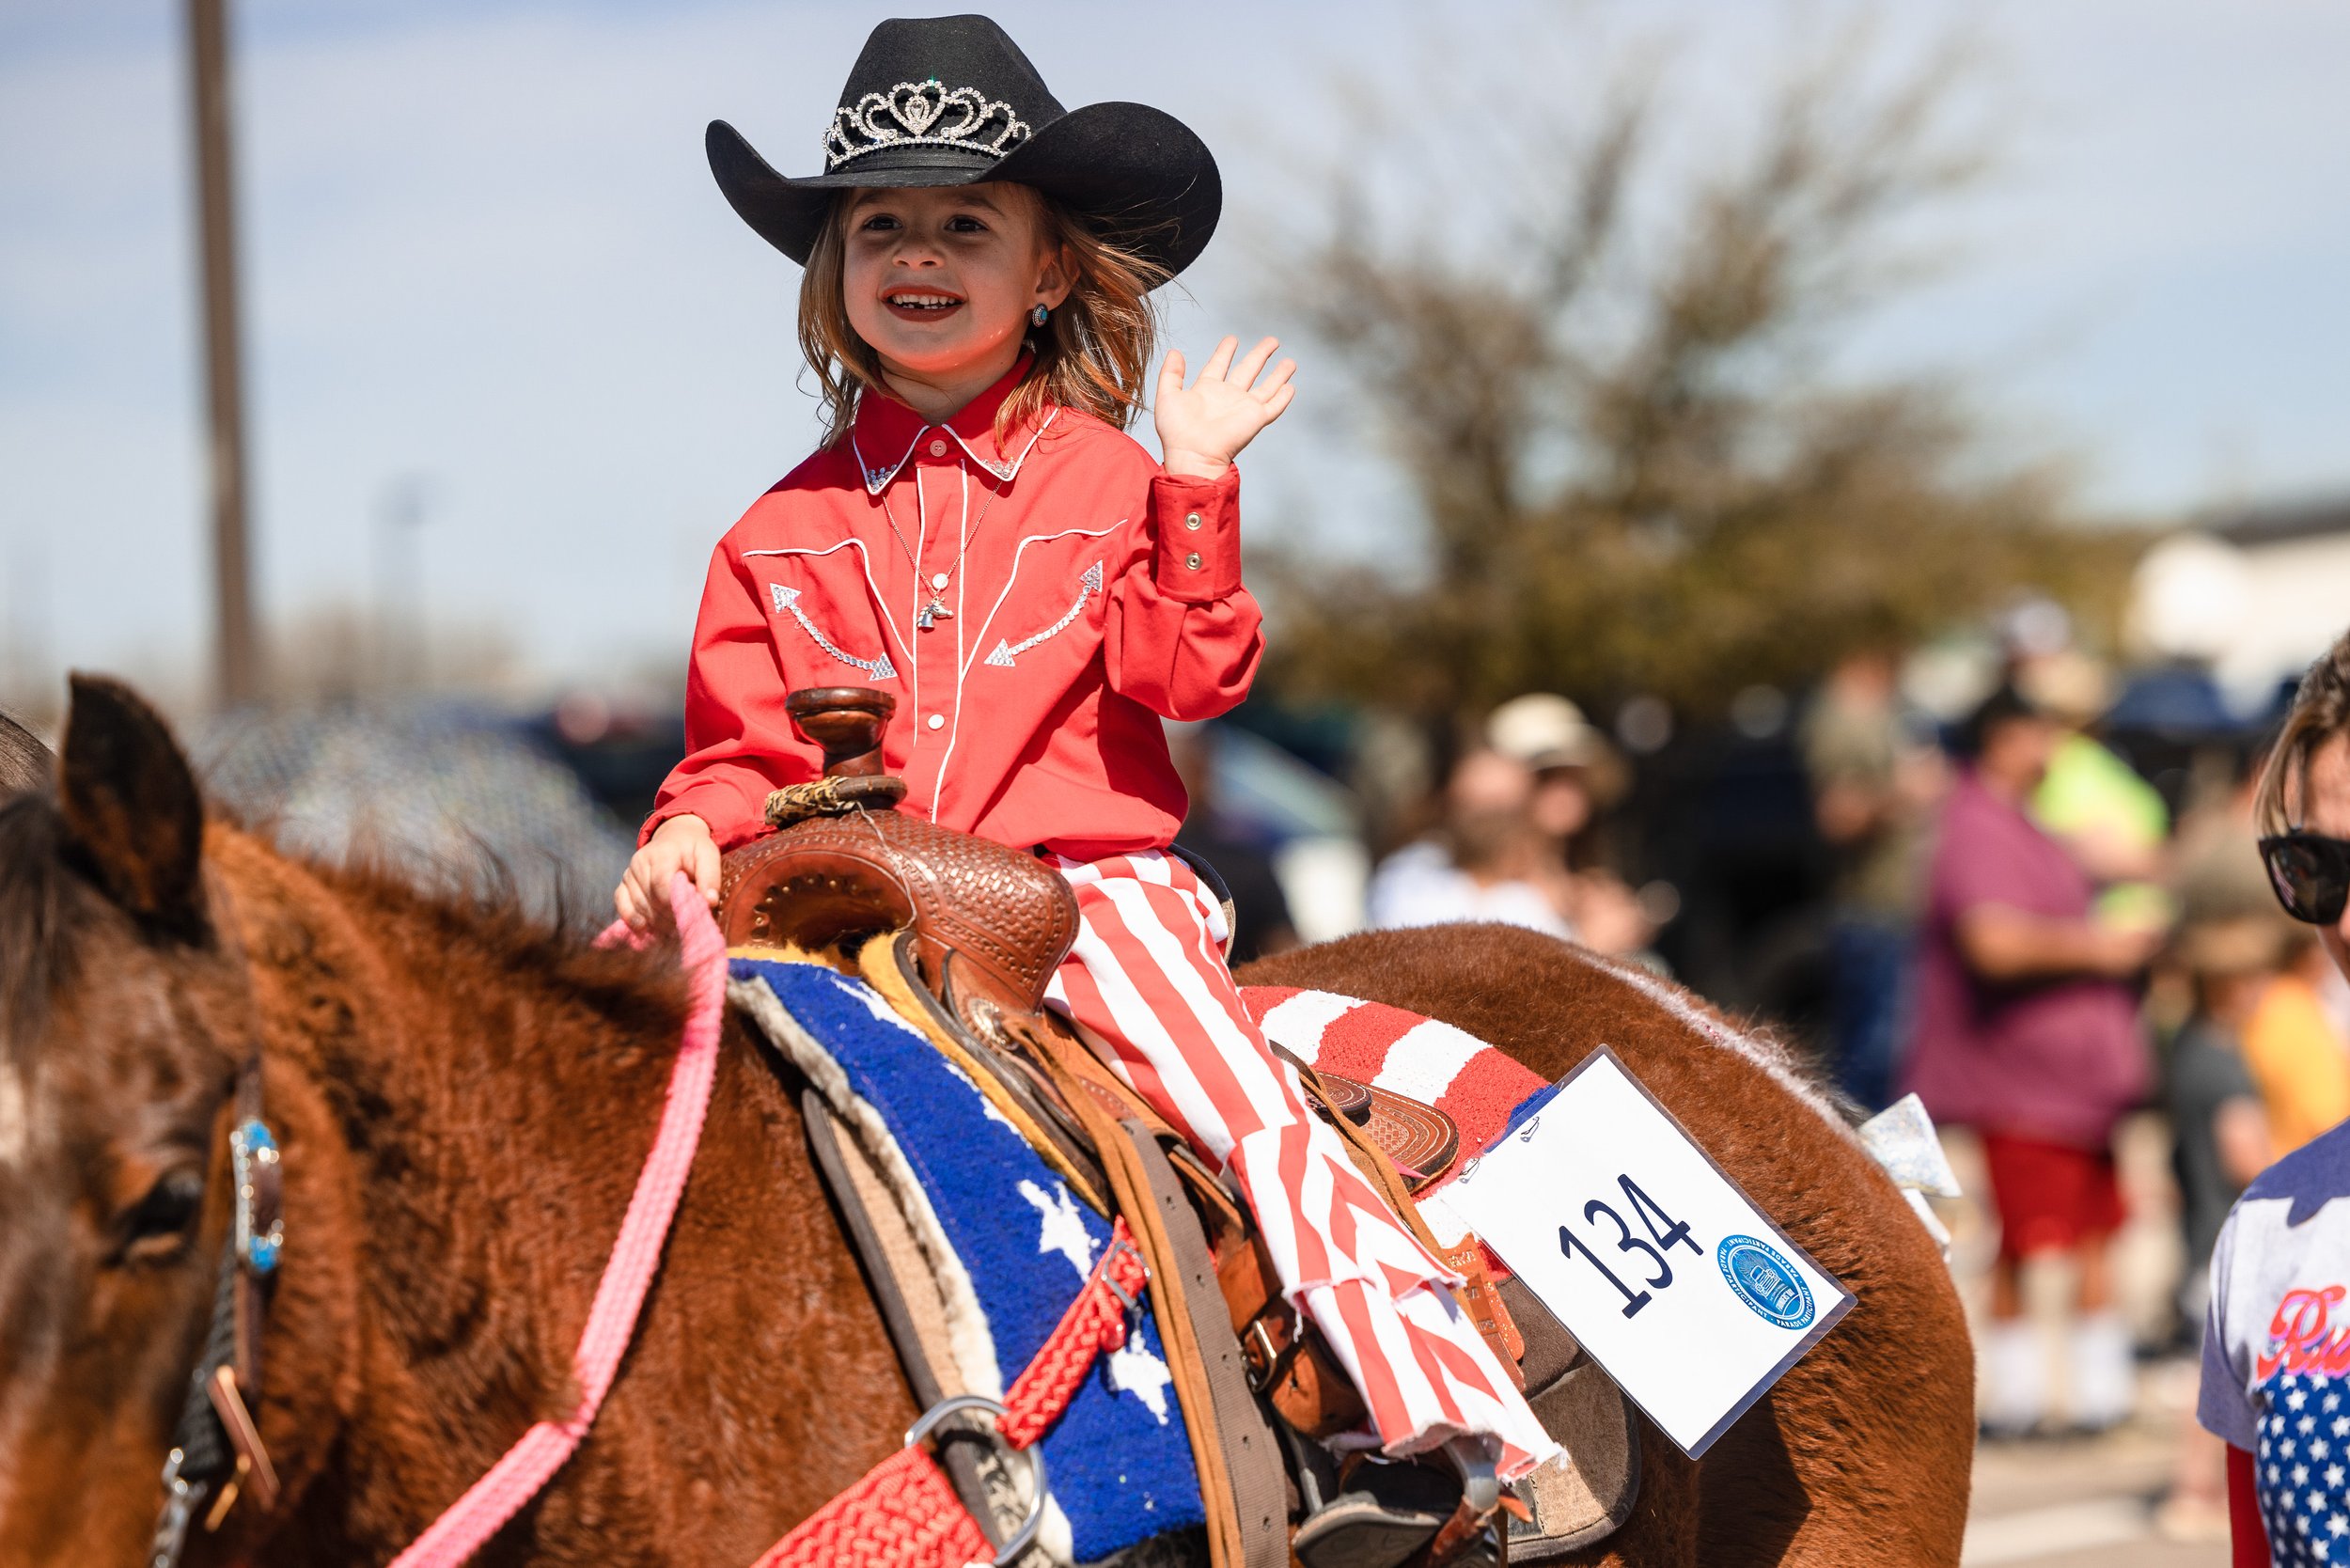  Founders’ Day Parade (rodeo queen in parade) 